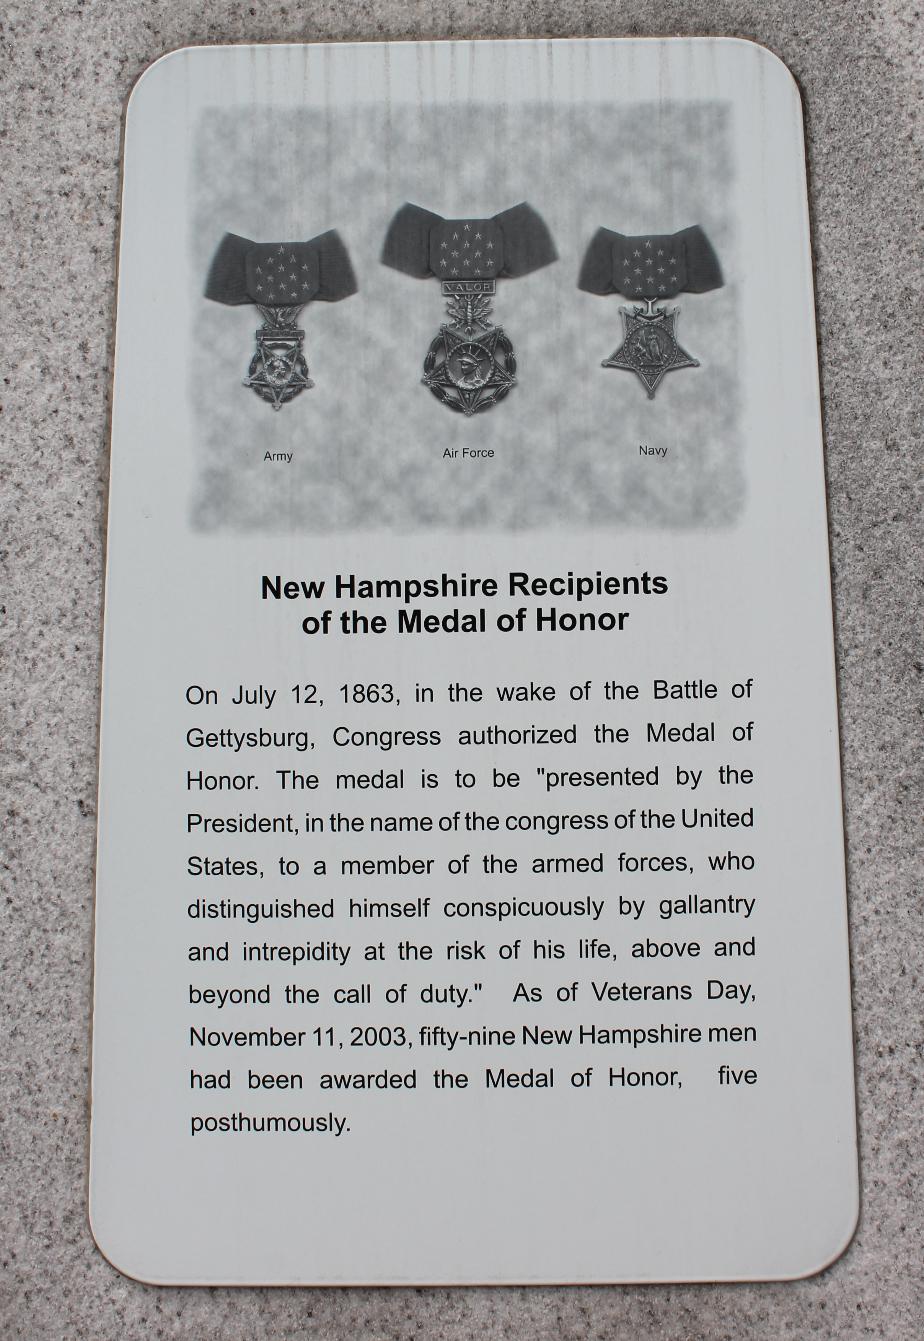 NH State Veterans Cemetery - NH Recipients of the Medal of Honor